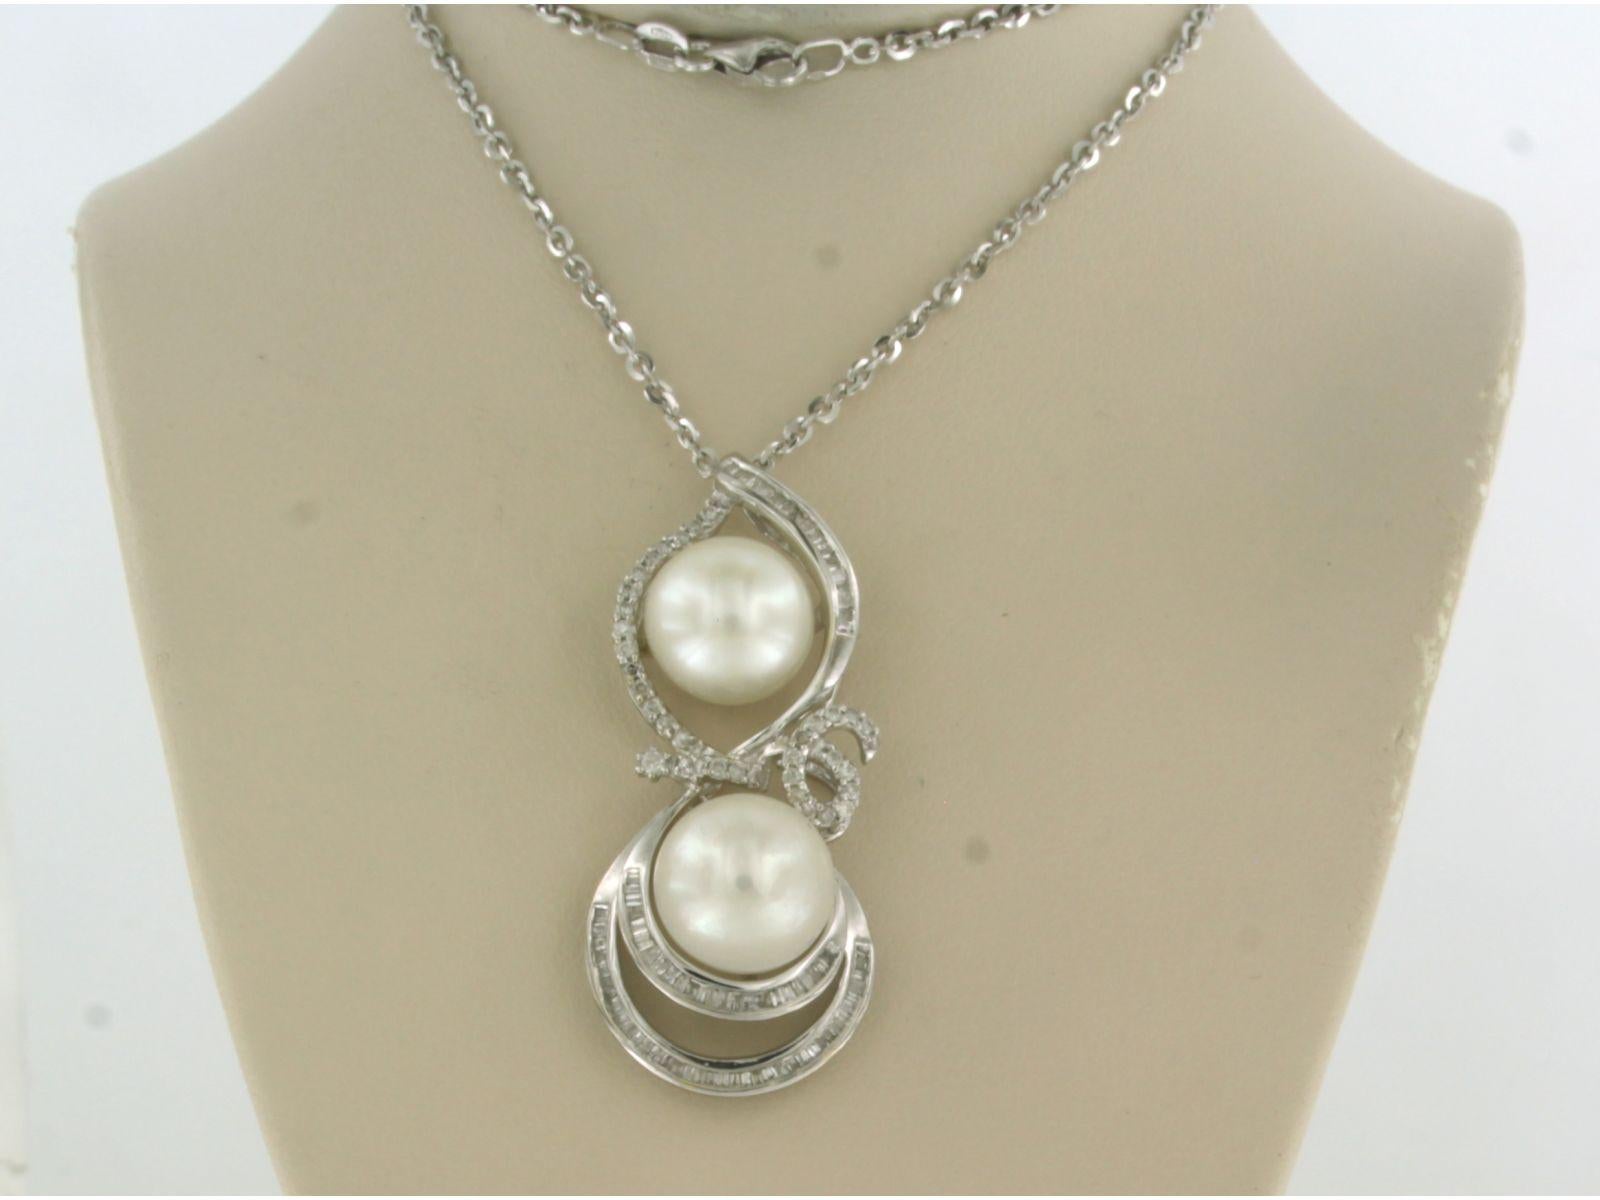 18k white gold necklace with pendant set with pearls and brilliant and taper cut diamonds. 1.00ct - F/G - piq. - 40 cm

detailed description:

the length of the necklace is 40 cm long by 1.5 mm wide

Dimensions of the pendant are 4.2 cm long by 1.8